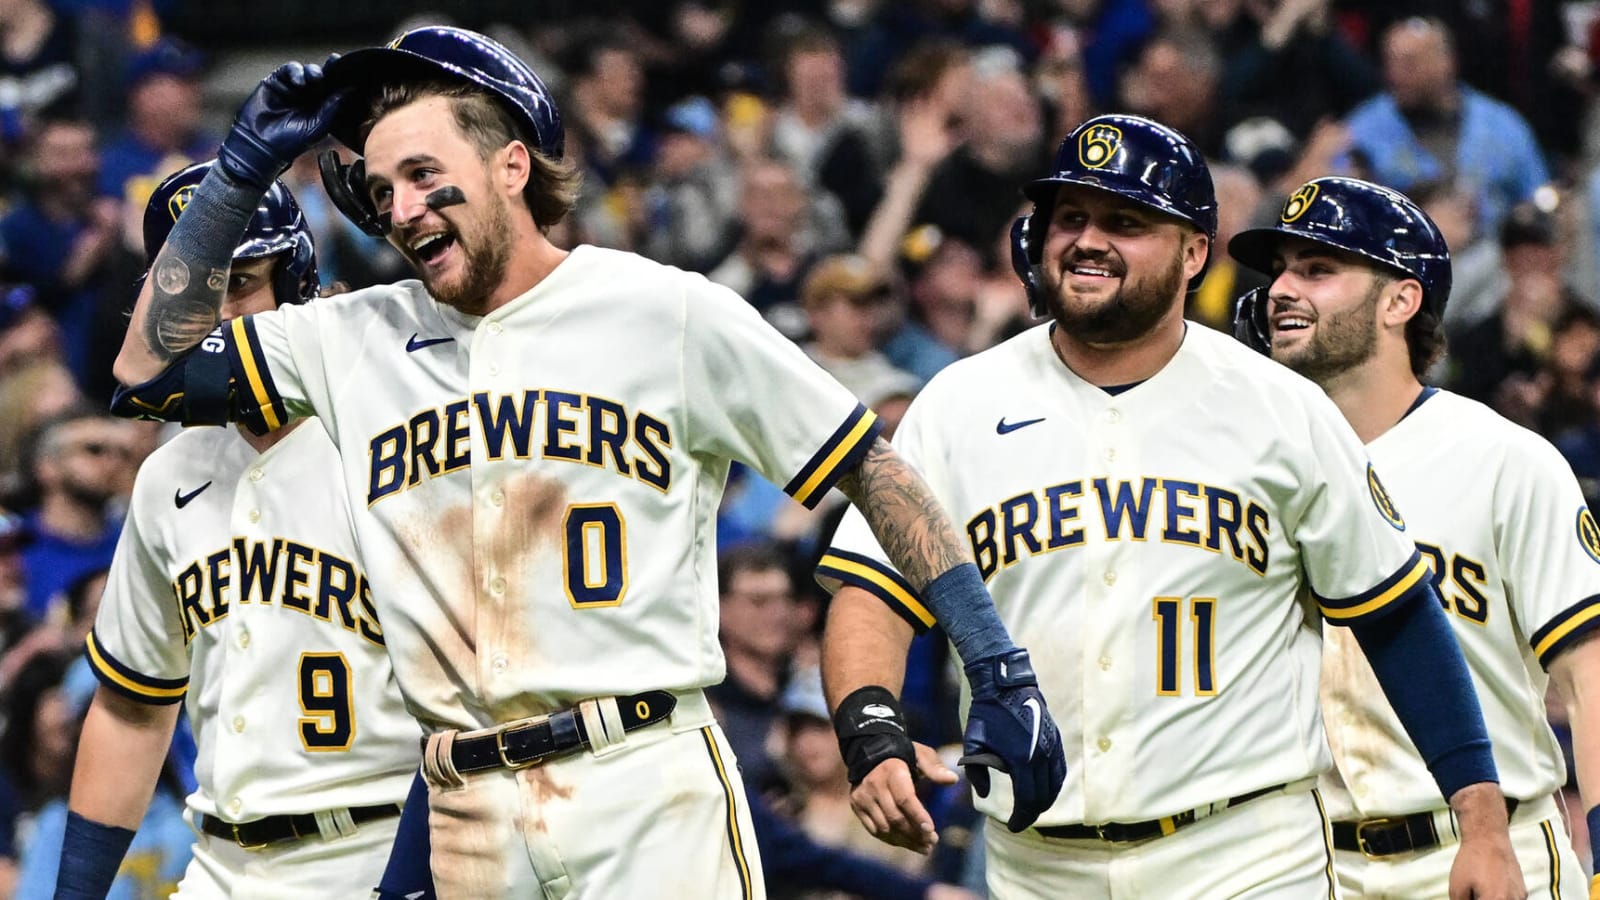 Brewers keeping pace in NL Central despite injuries